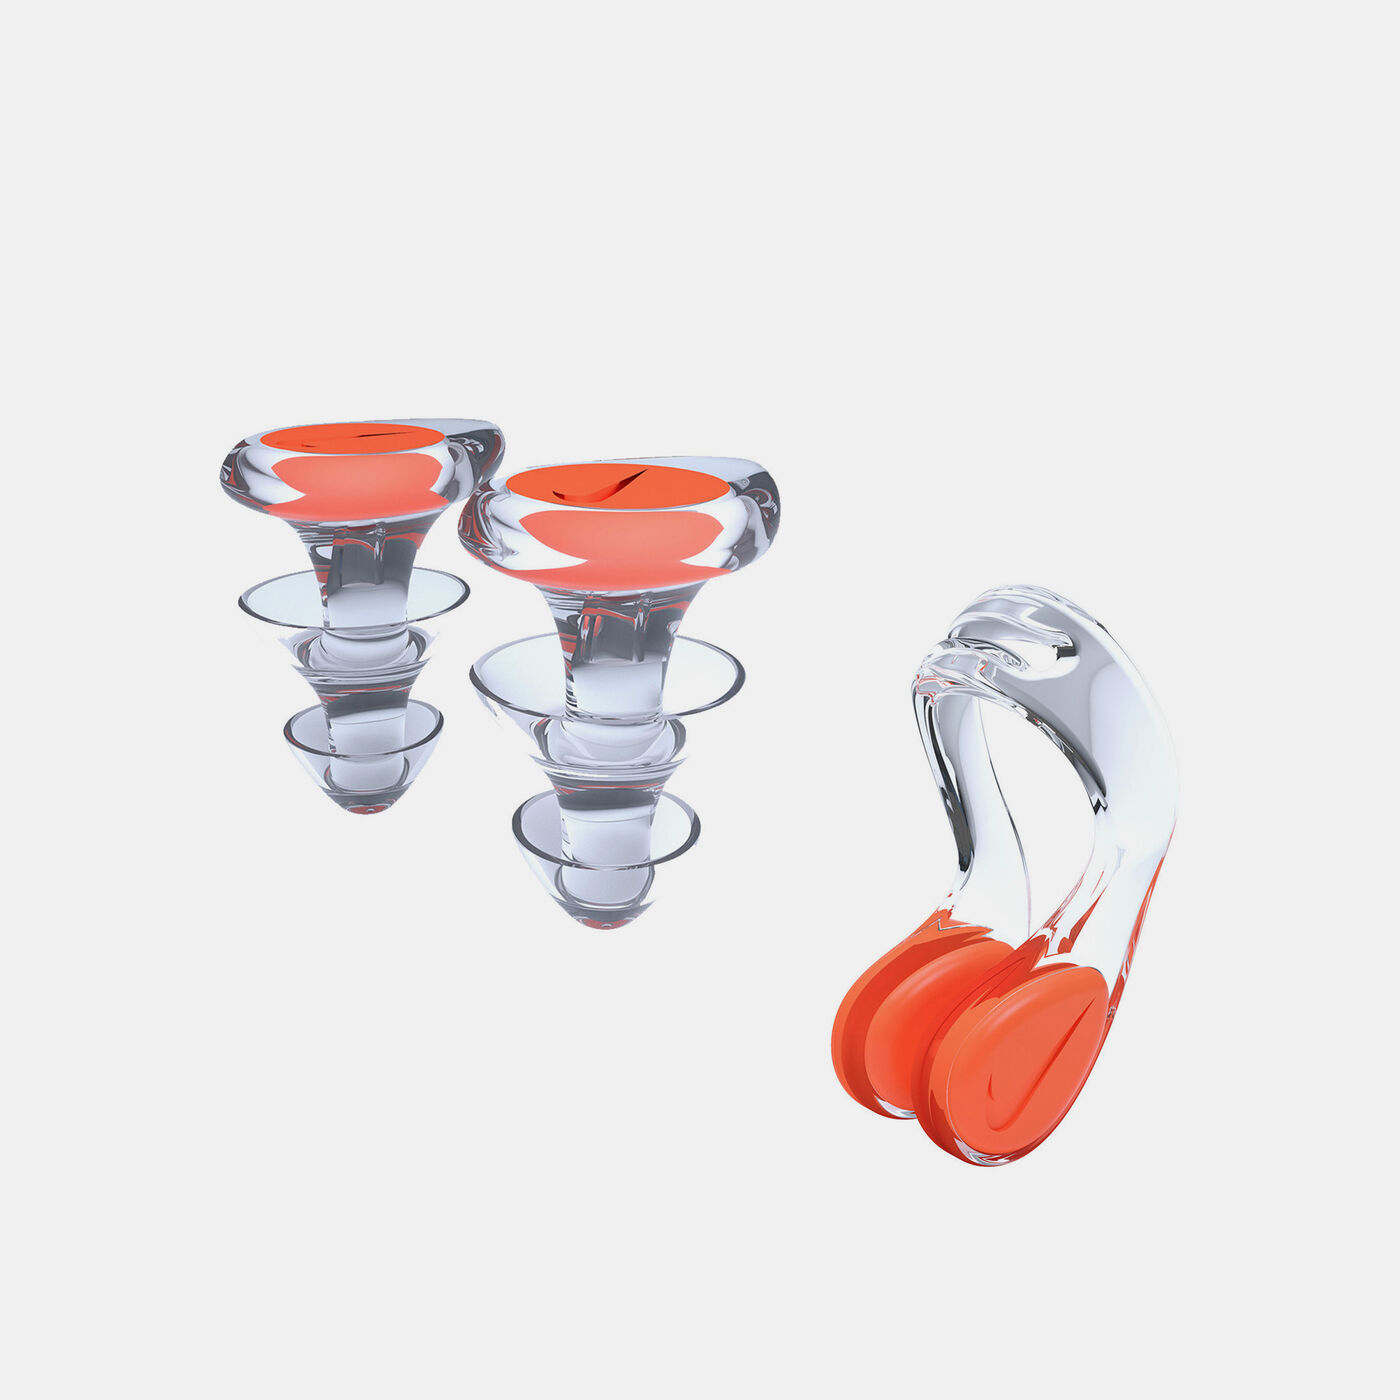 Swimming Nose Clip And Ear Plug Set